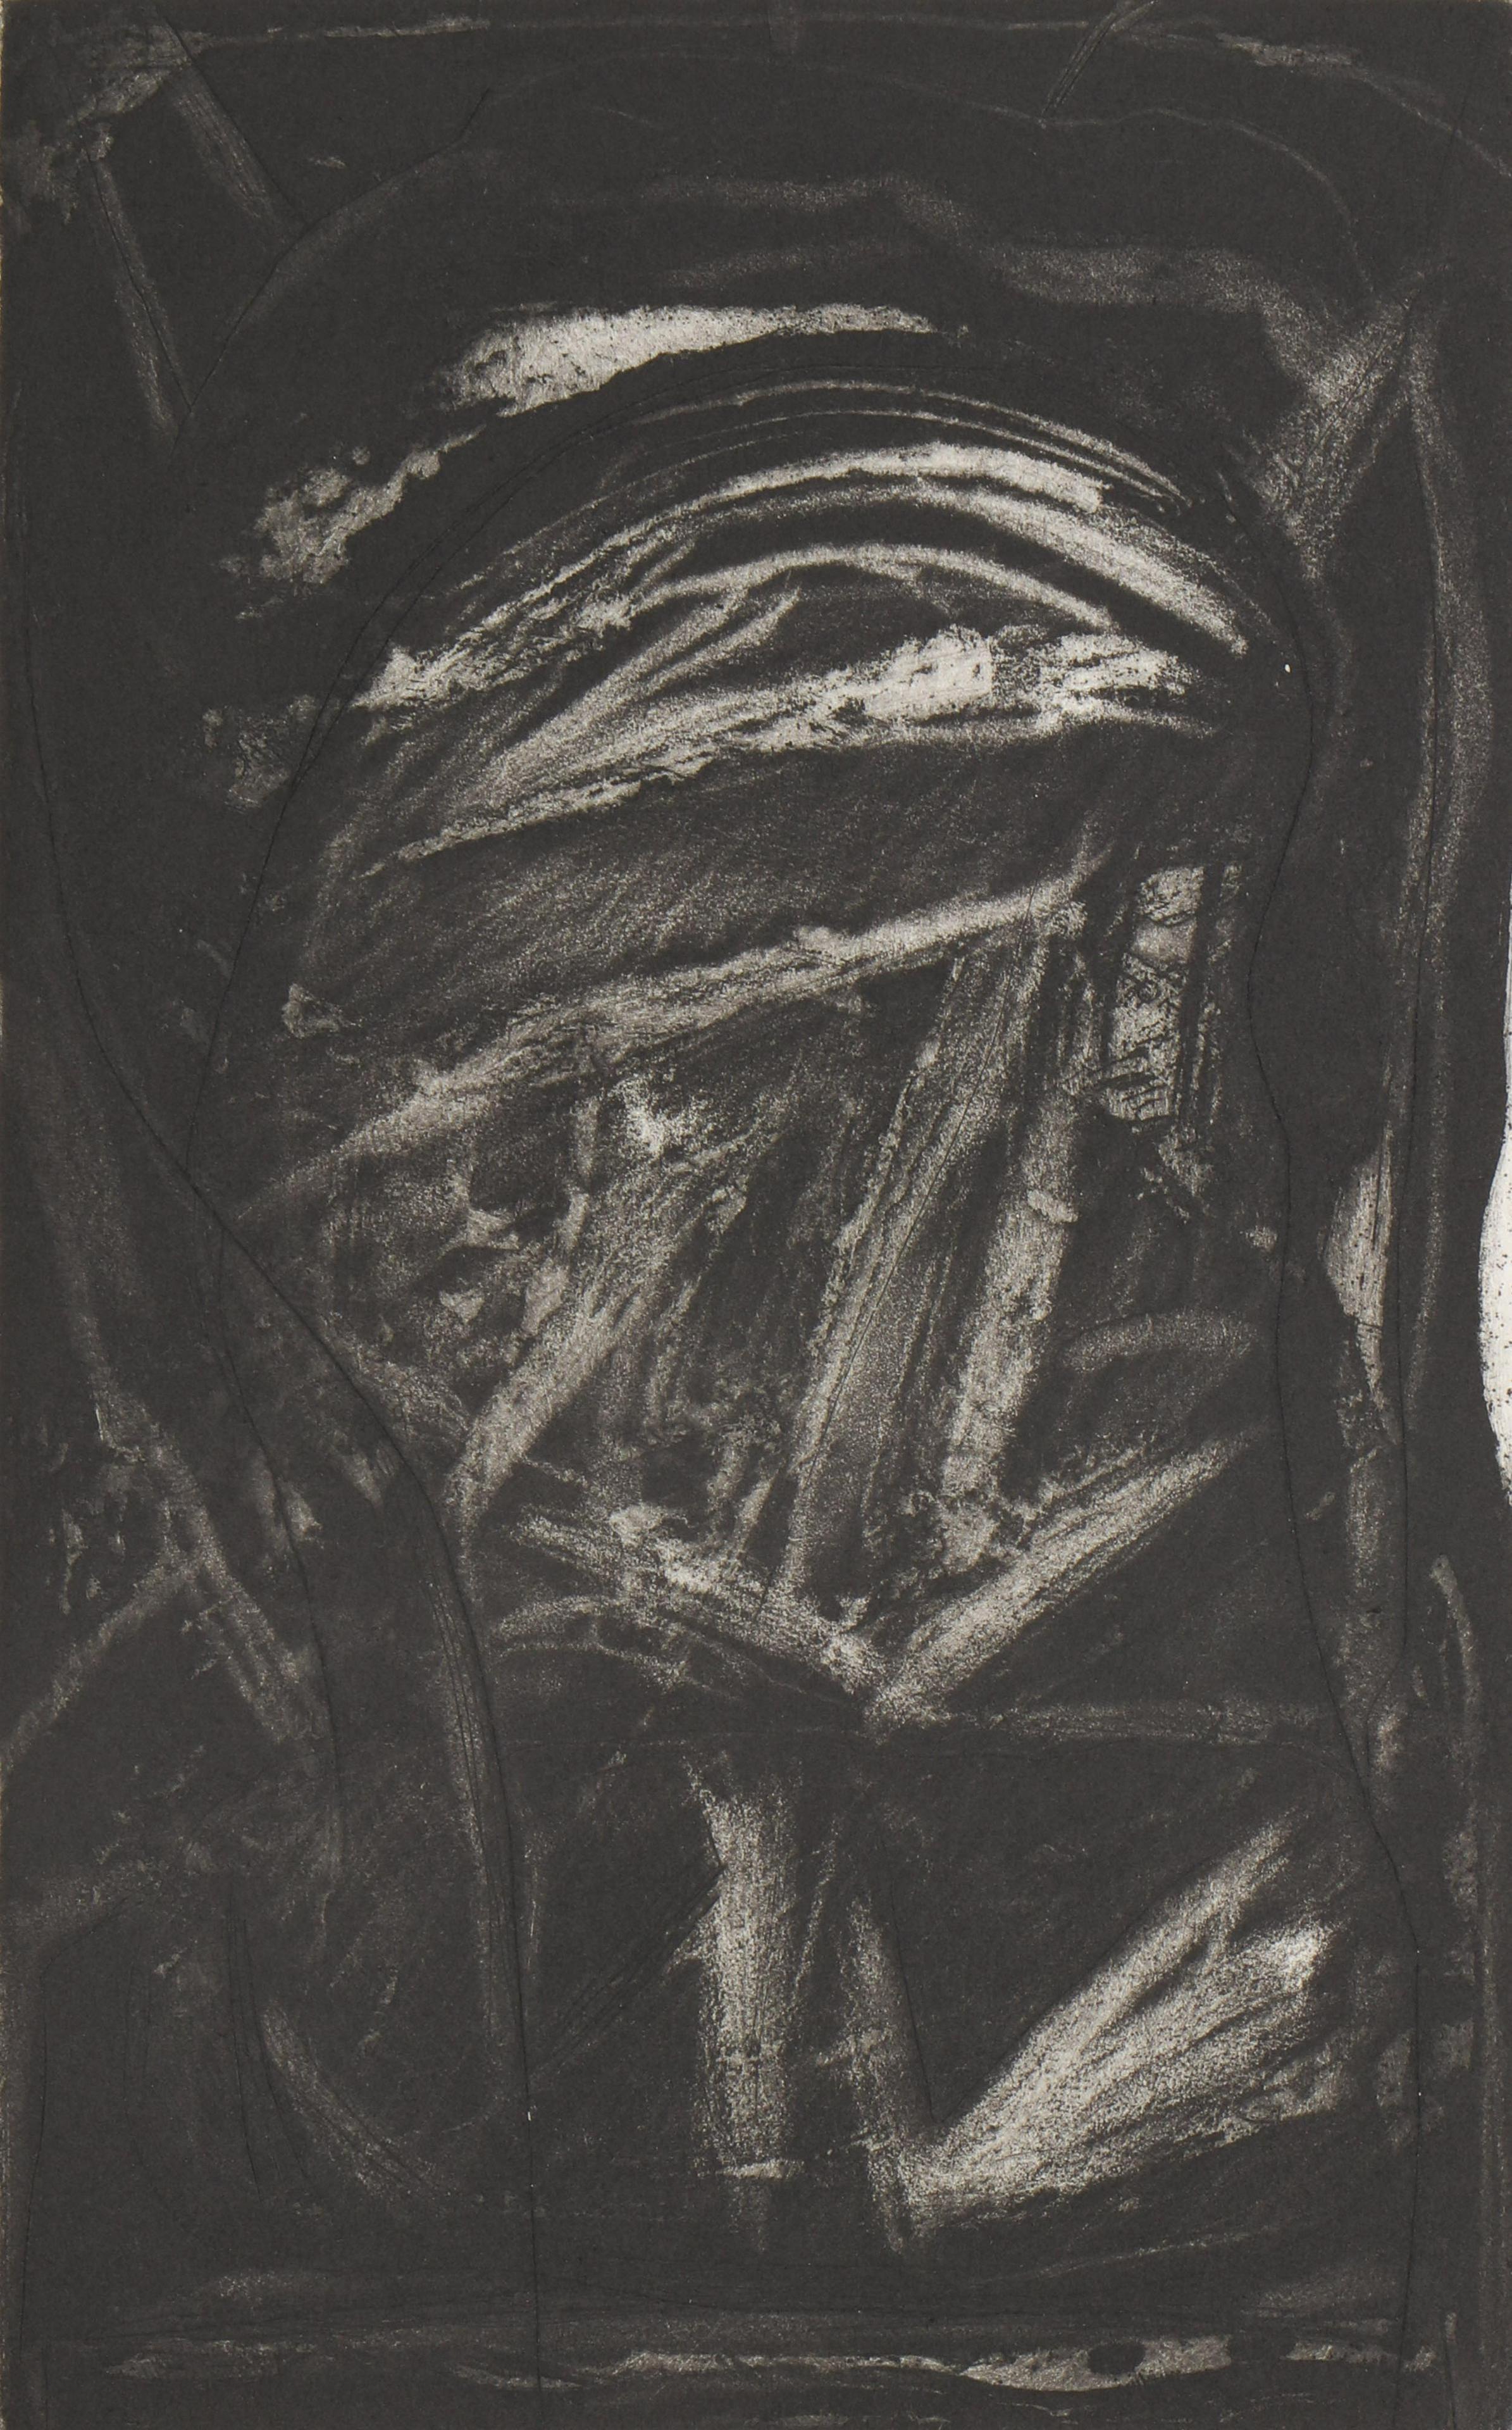 Melissa Meyer (American, b. 1946) 
1984-1987, aquatint etching in black on wove paper, hand signed print, dated, and numbered from small edition of 10. 
Unframed. size: 9.75'' x 6'', 25 x 15 cm (plate); 27'' x 19.5'', 69 x 50 cm (sheet). 


 Meyer